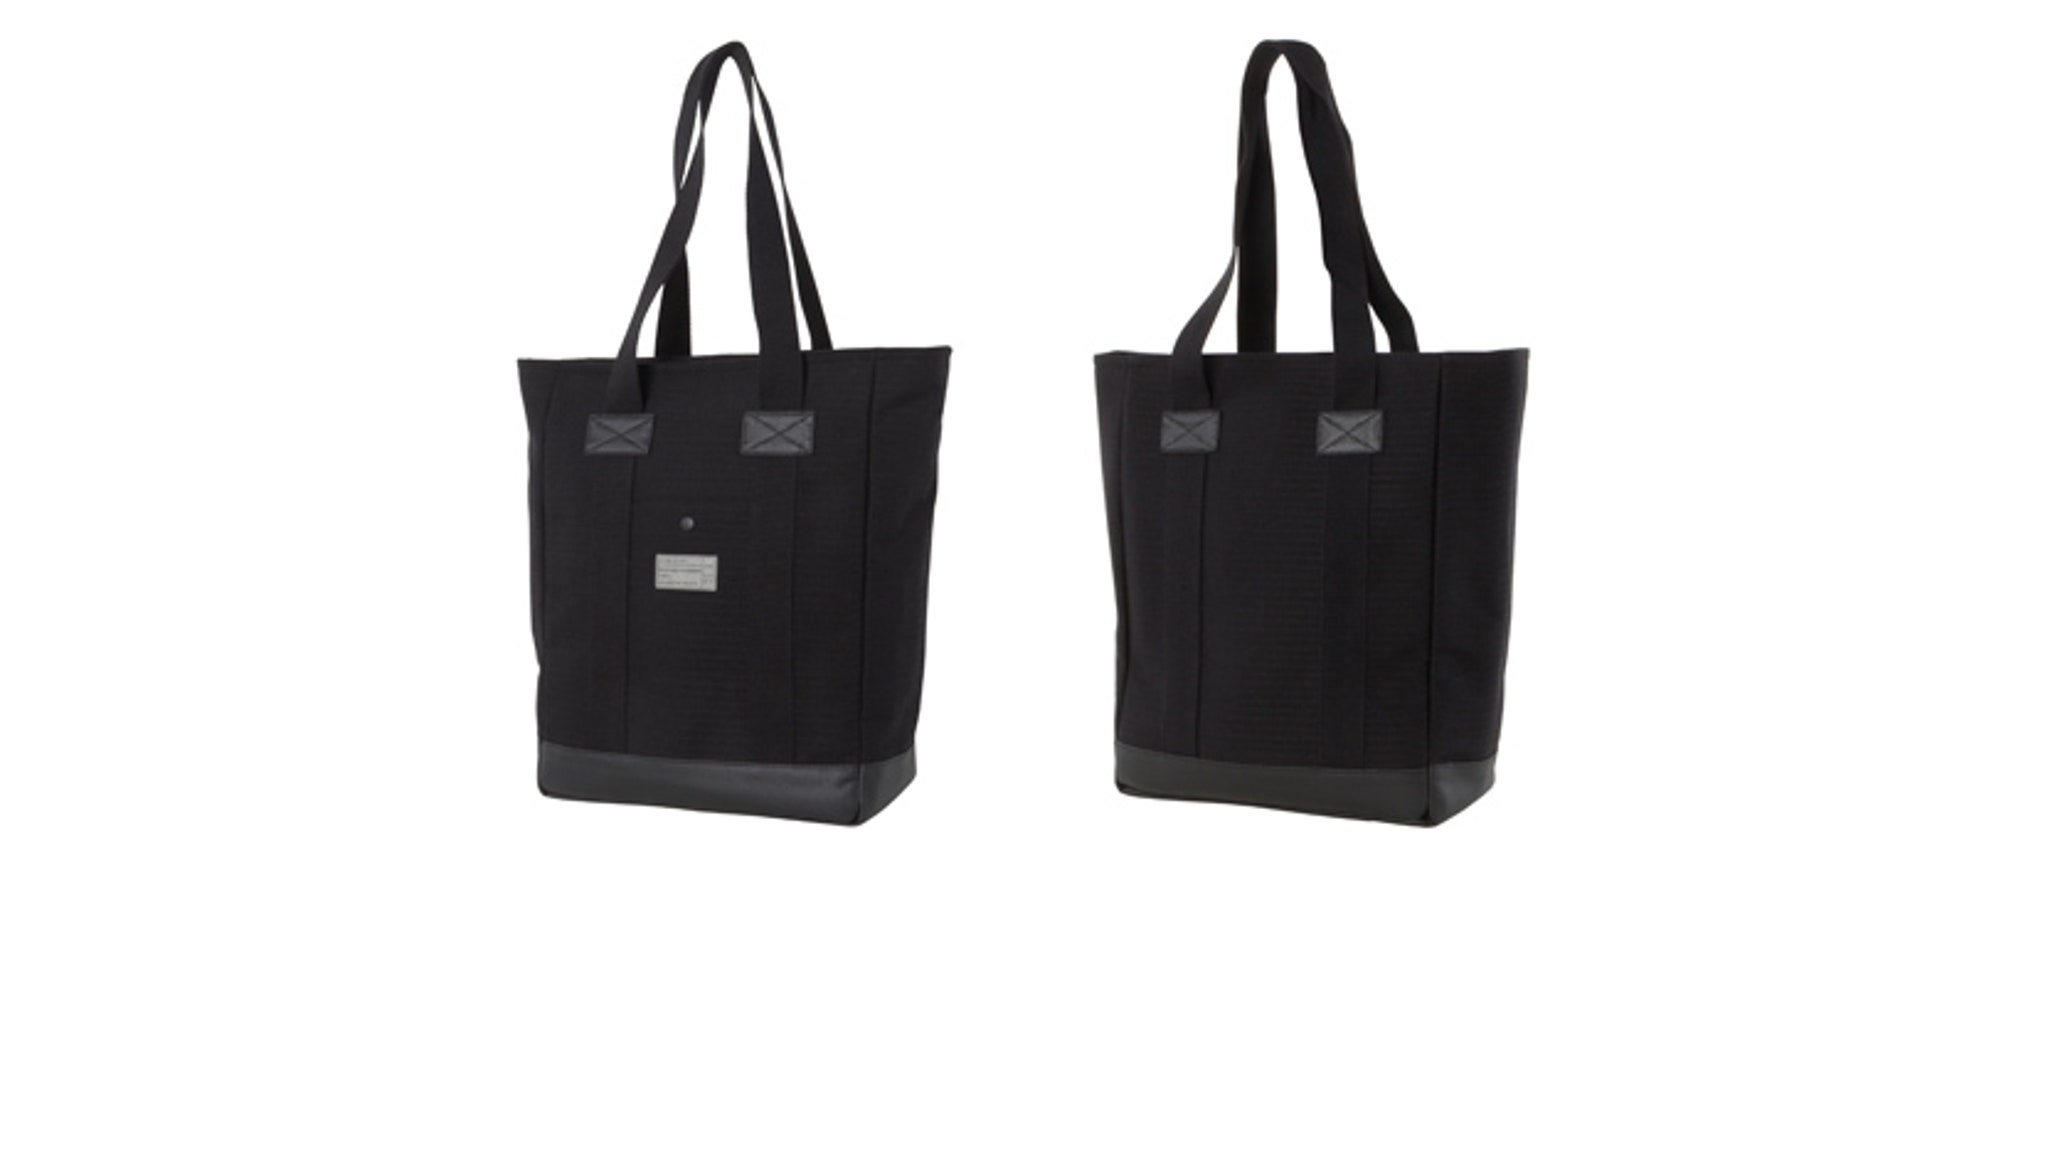 You Can Win a HEX Tote Bag!